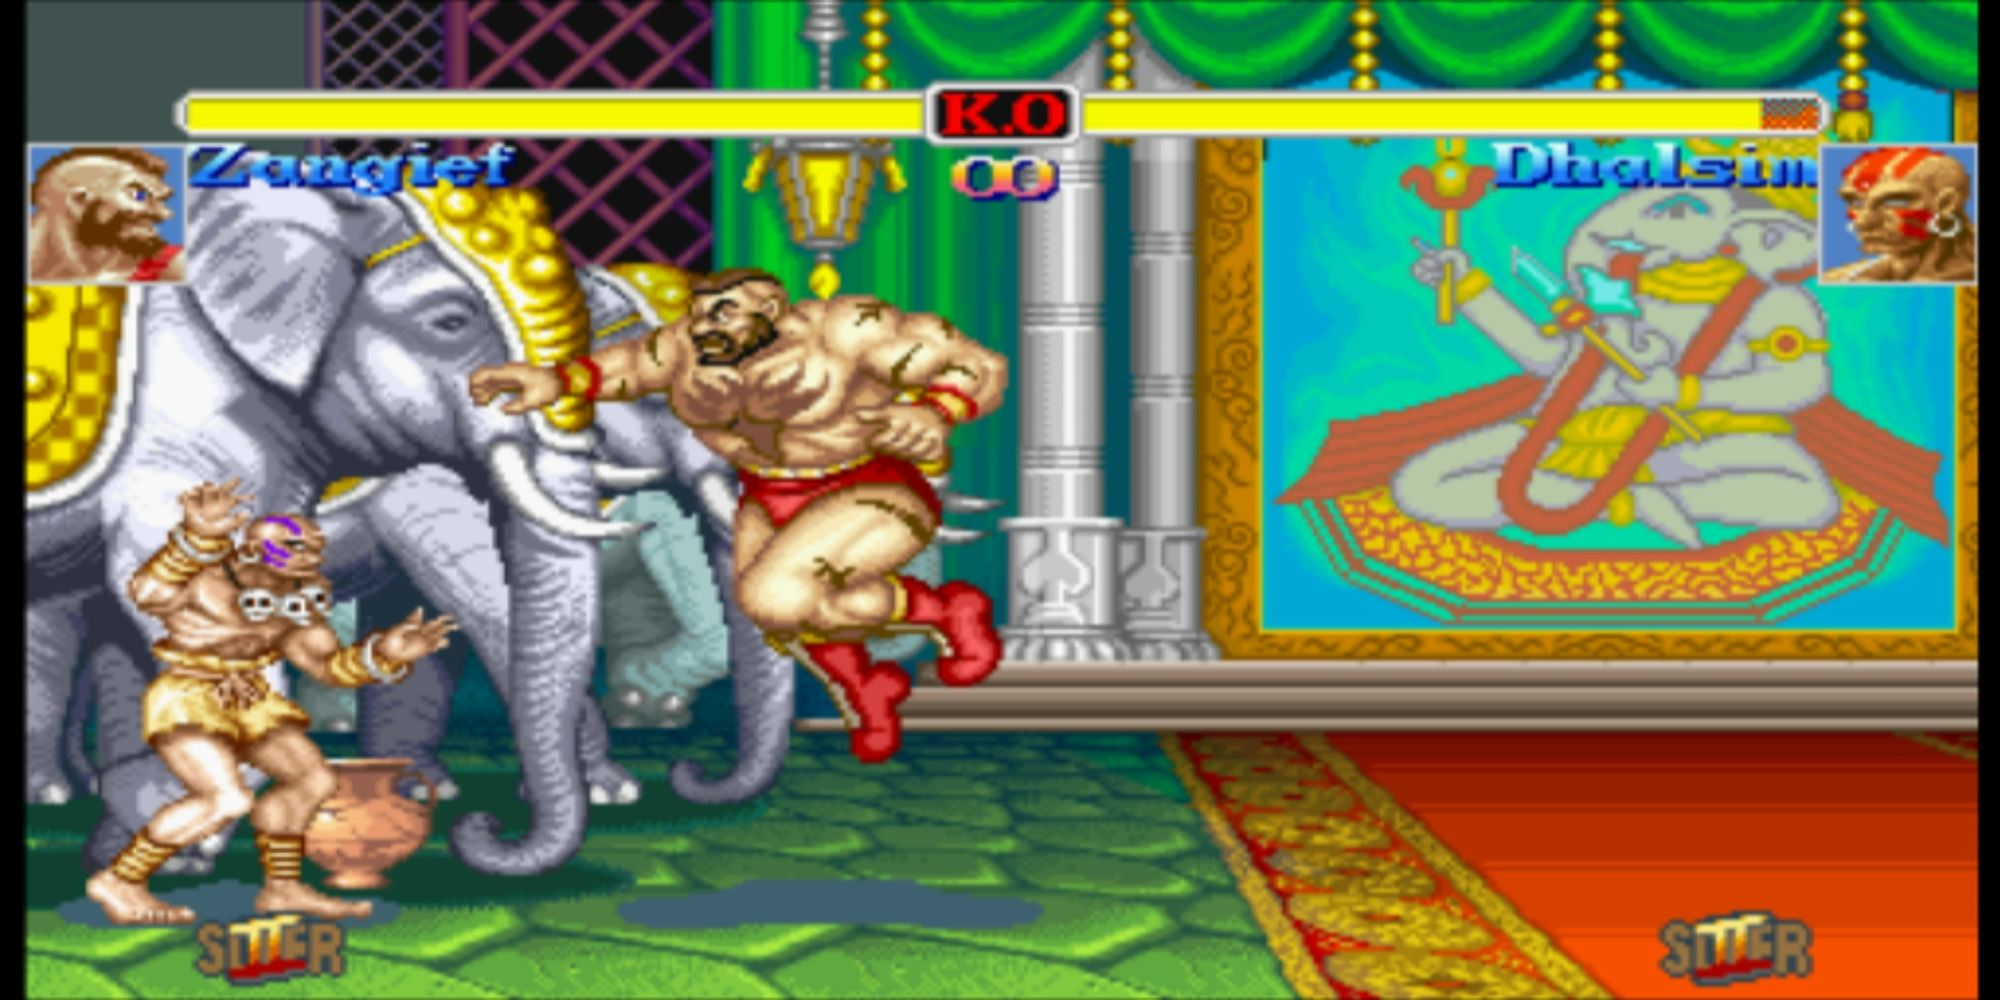 Super SF2 Zangief leaps toward Dhalsim in Maharaja Palace in Hyper Street Fighter 2.